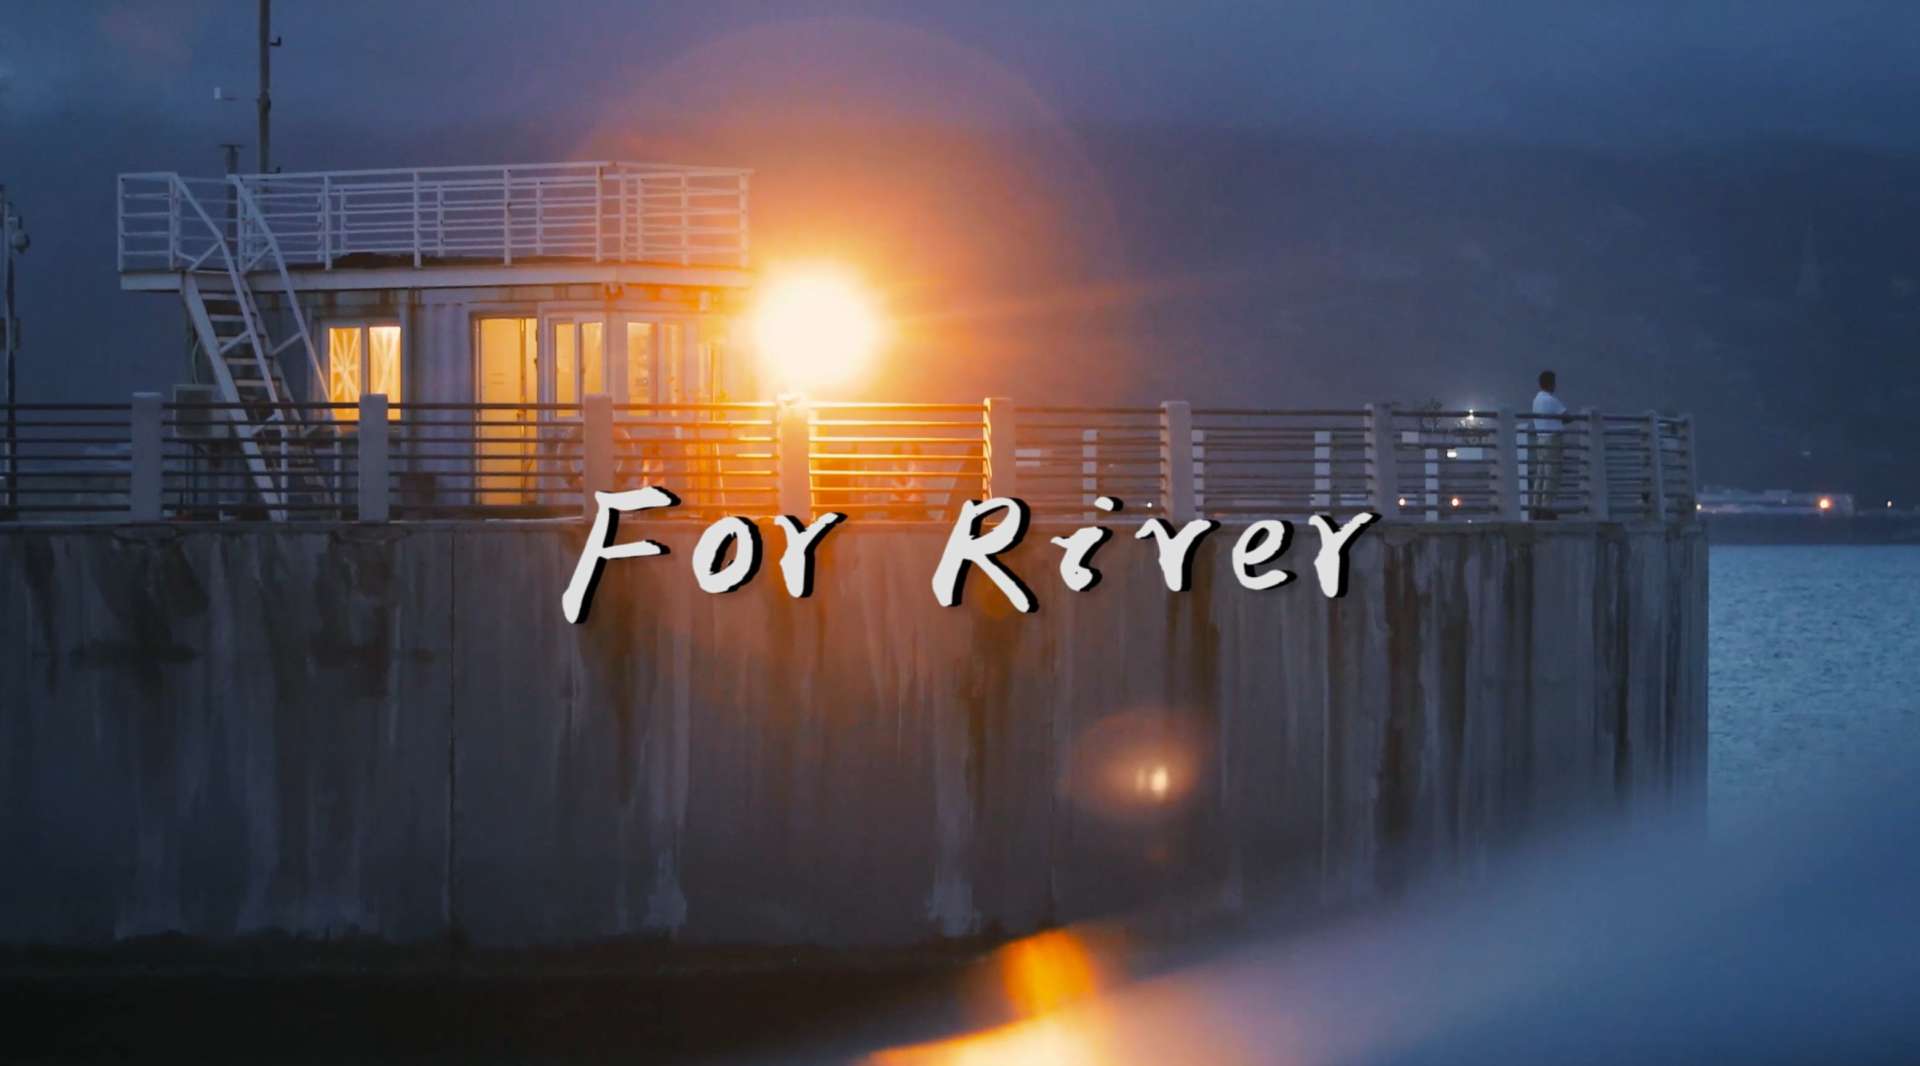 For River